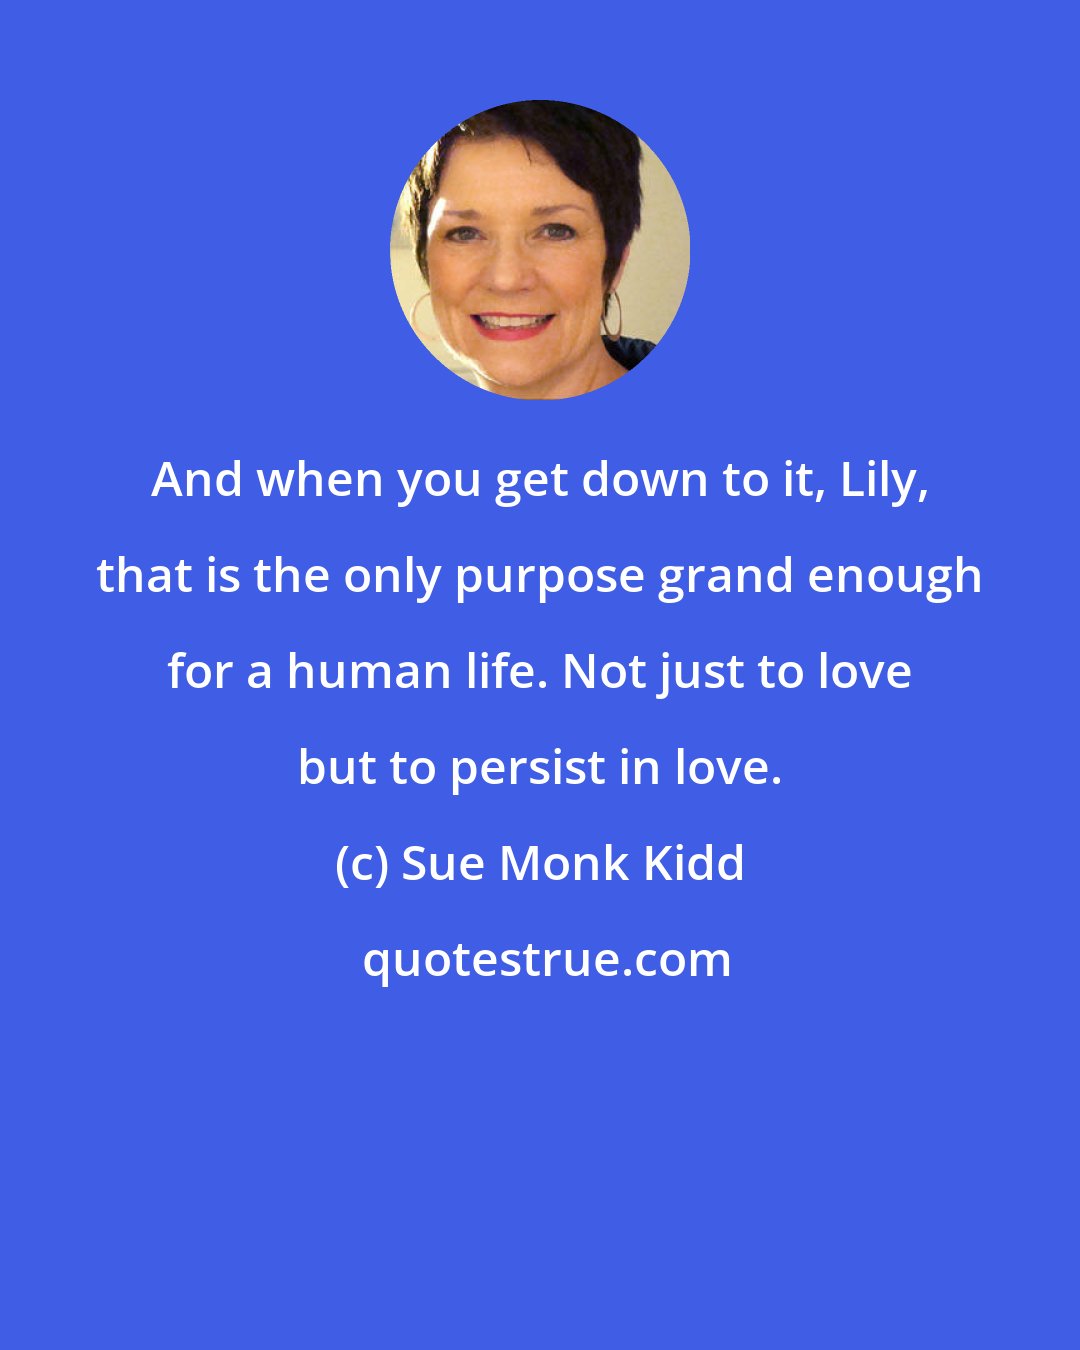 Sue Monk Kidd: And when you get down to it, Lily, that is the only purpose grand enough for a human life. Not just to love but to persist in love.